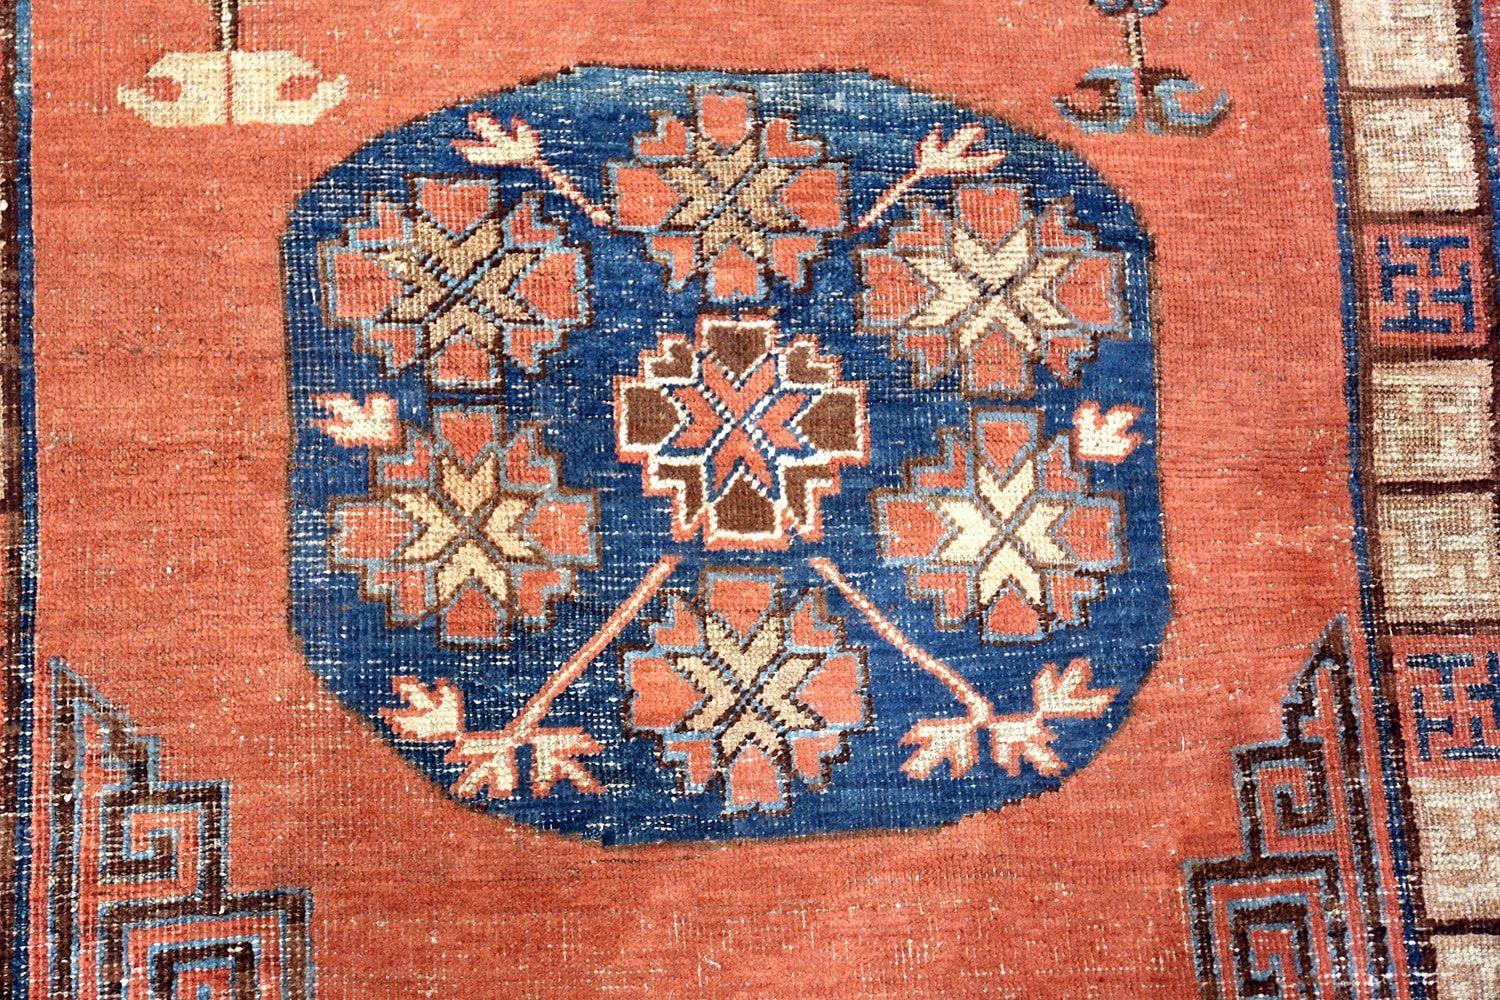 Beautiful tribal and rust colored background pomegranate design antique Khotan rug, Country of Origin / rug type: East Turkestan rugs, date circa early 19th century.